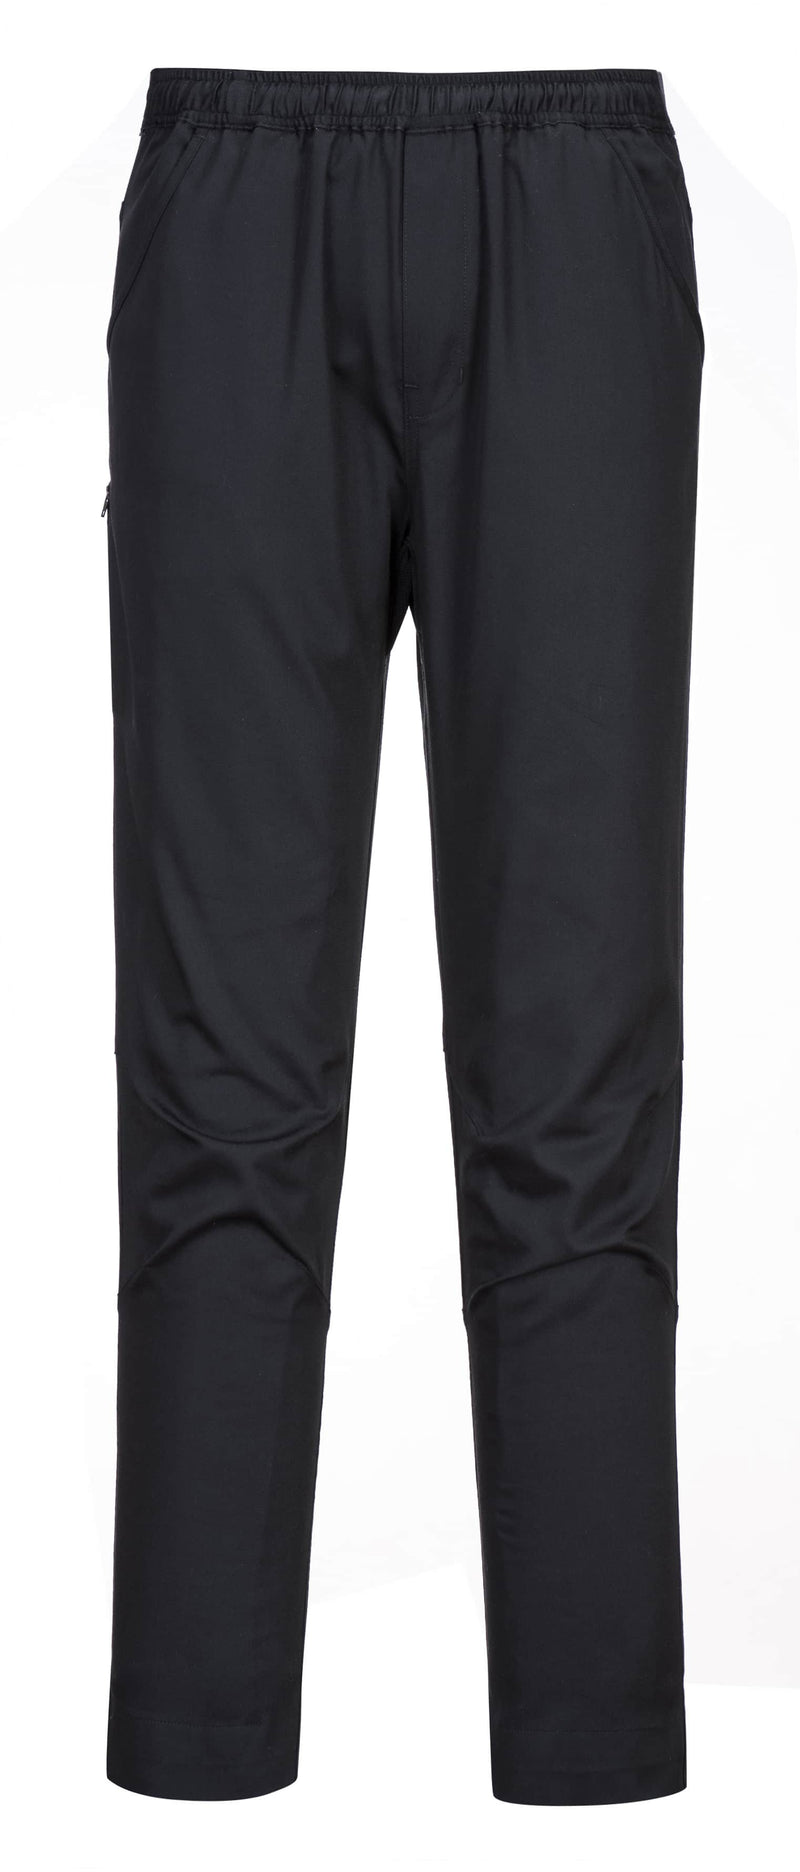 Surrey Trousers